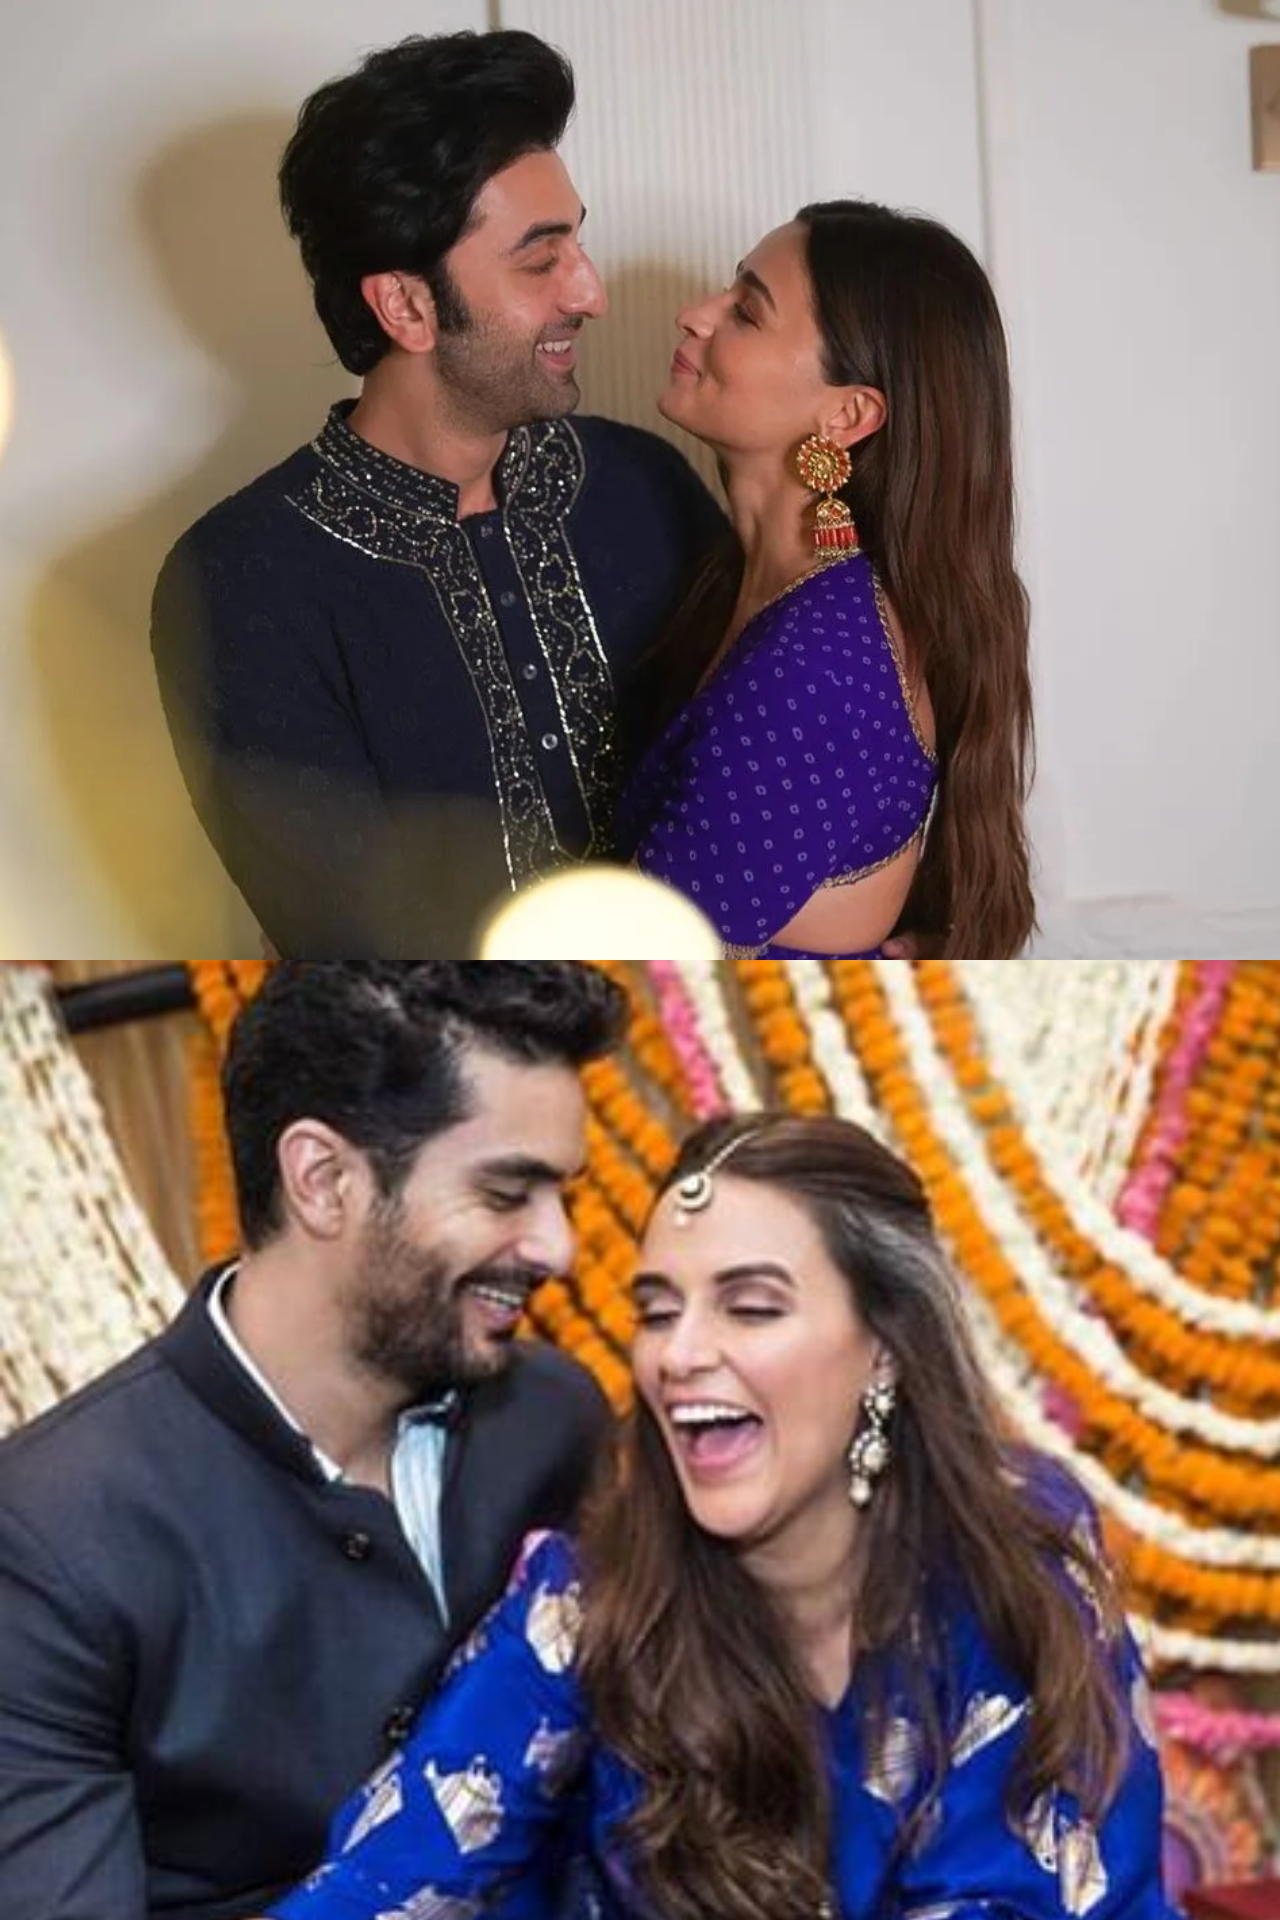 Many Bollywood celebrities surprised fans with endearing pregnancy announcements soon after they got married!